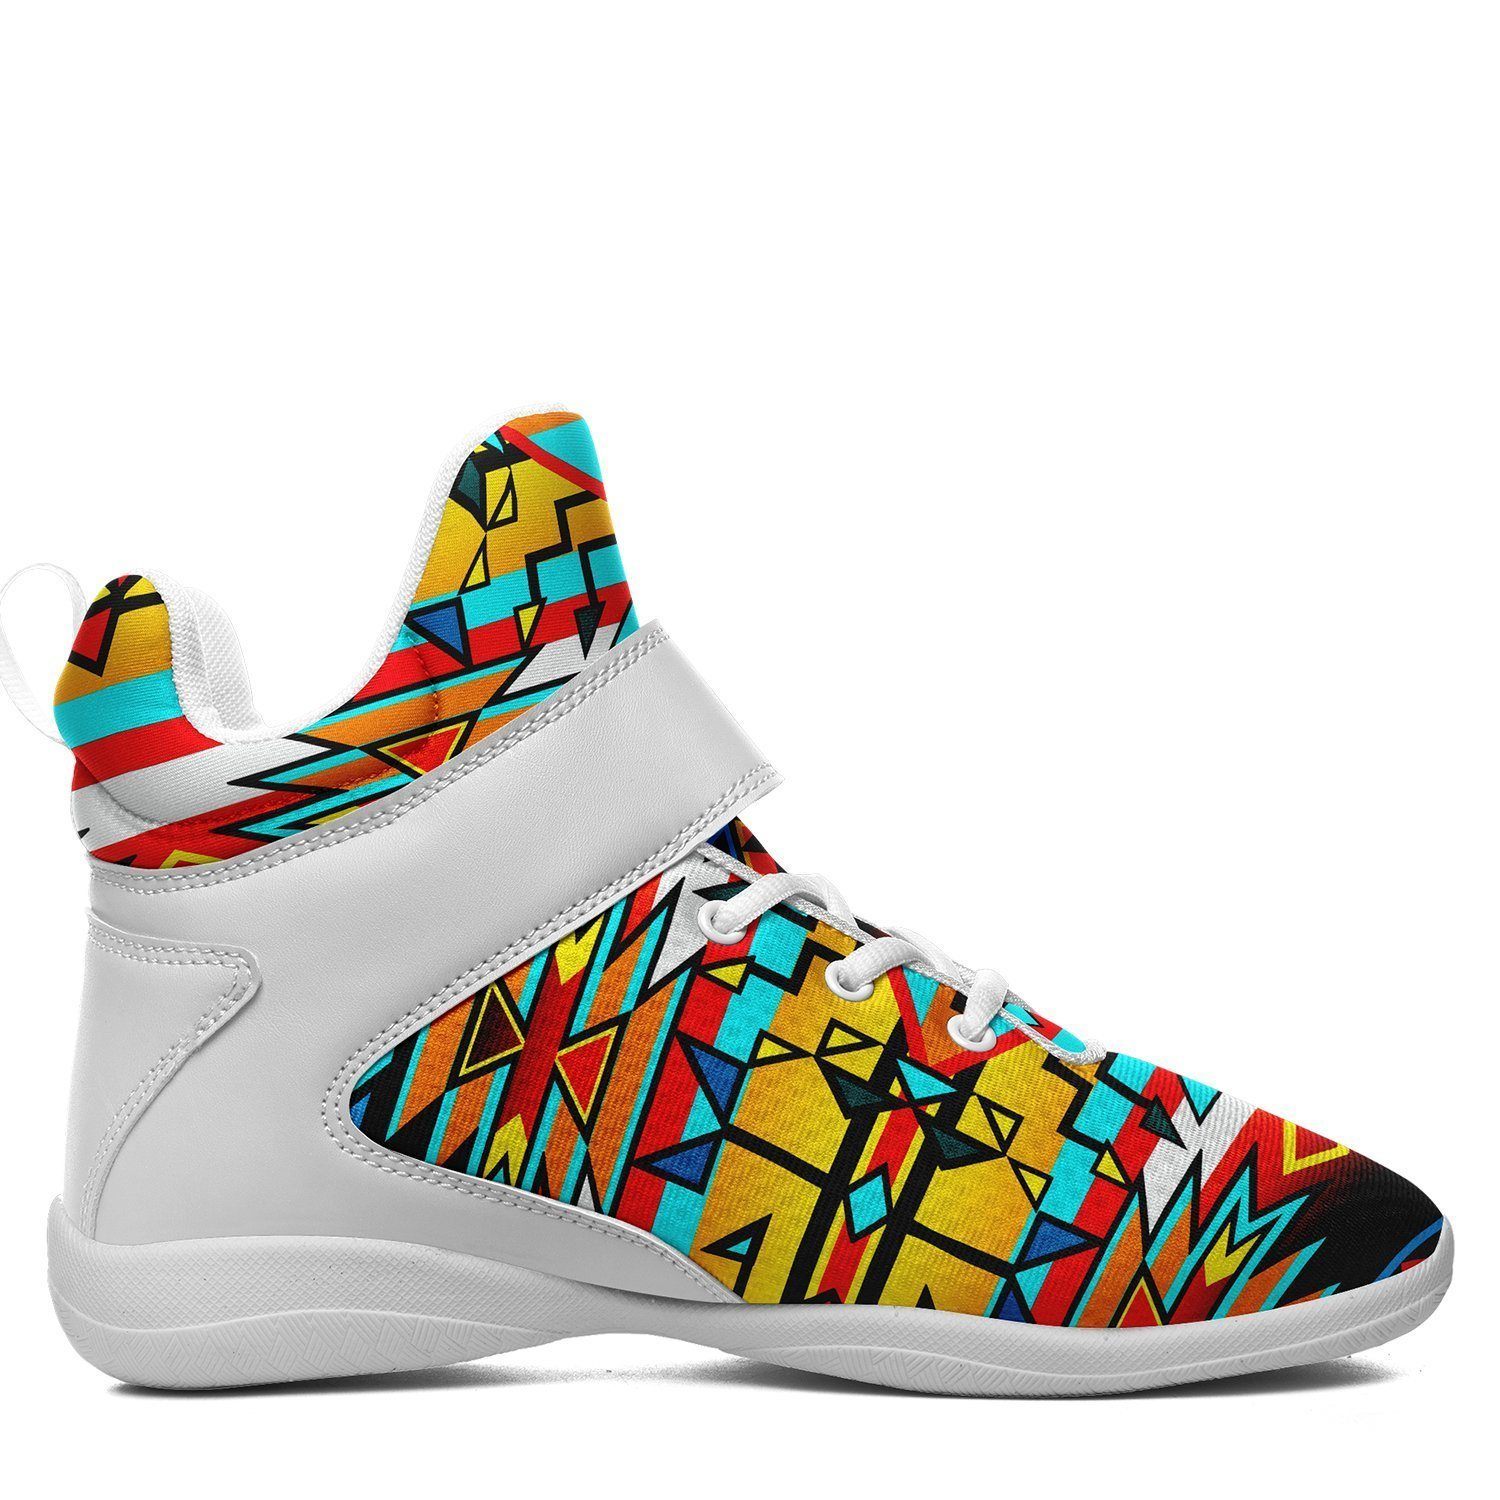 Force of Nature Twister Ipottaa Basketball / Sport High Top Shoes - White Sole 49 Dzine 